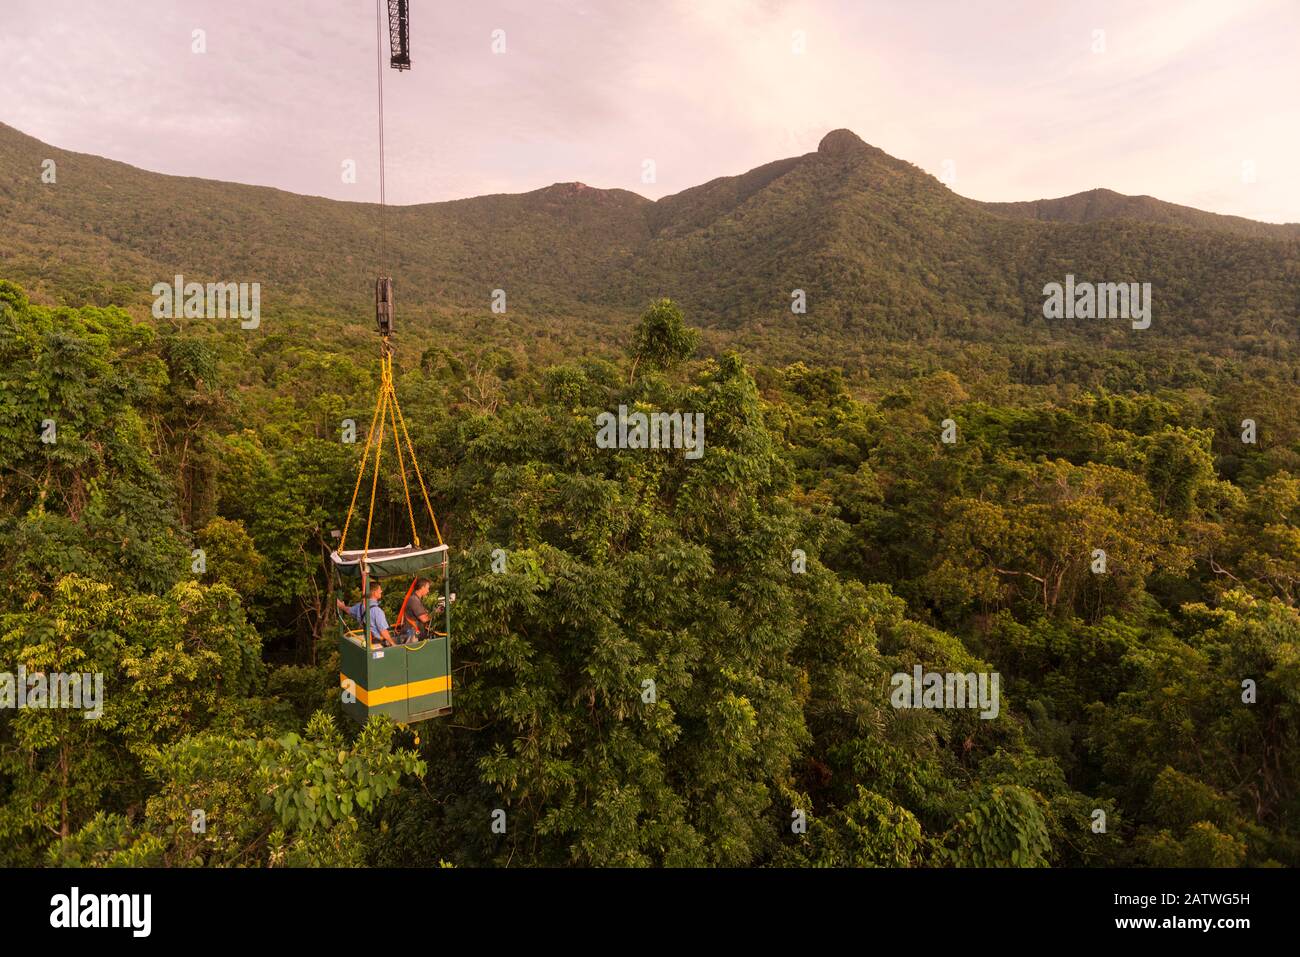 Scientists studying response to wet-dry seasonal transition in rainforest trees, in basket lifted by crane. Daintree rainforest observatory, Queensland, Australia. February 2015 Stock Photo